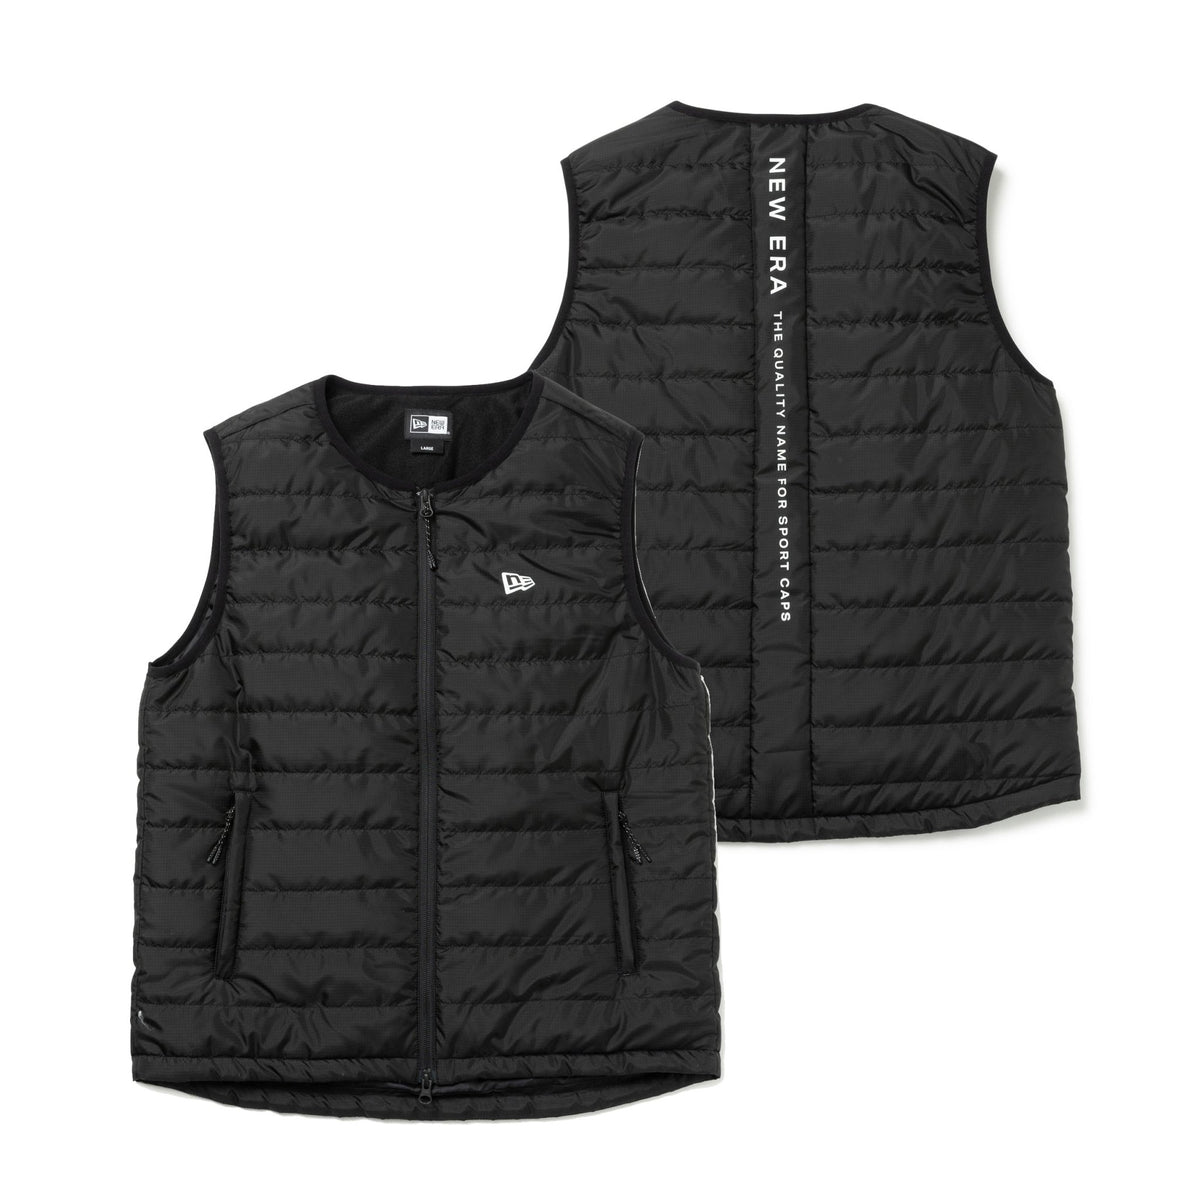 NO GOLFPADDED RIVERSIBLE VEST | camillevieraservices.com